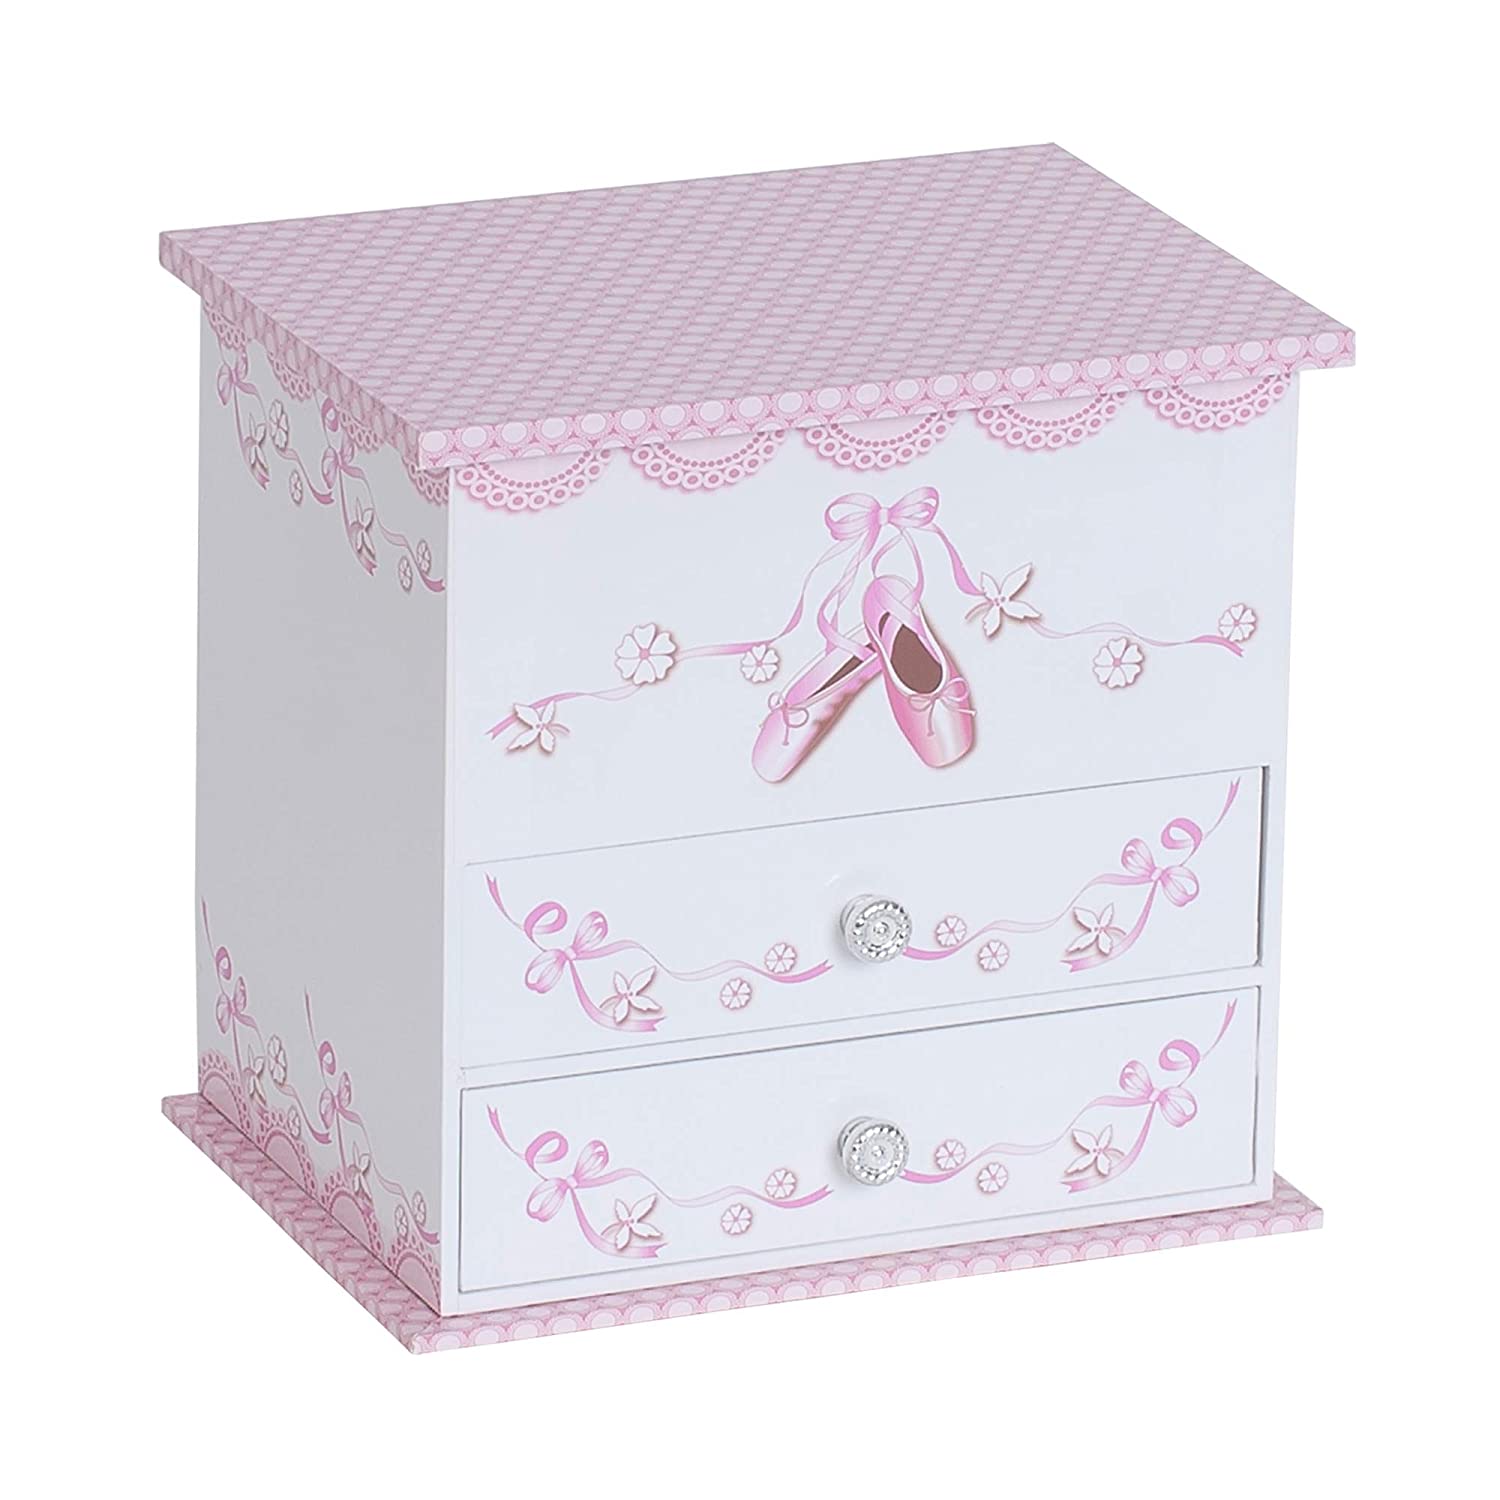 Mele & Co. Angel Ballerina Music Jewelry Box for Girls, Necklace and Earring Organizer